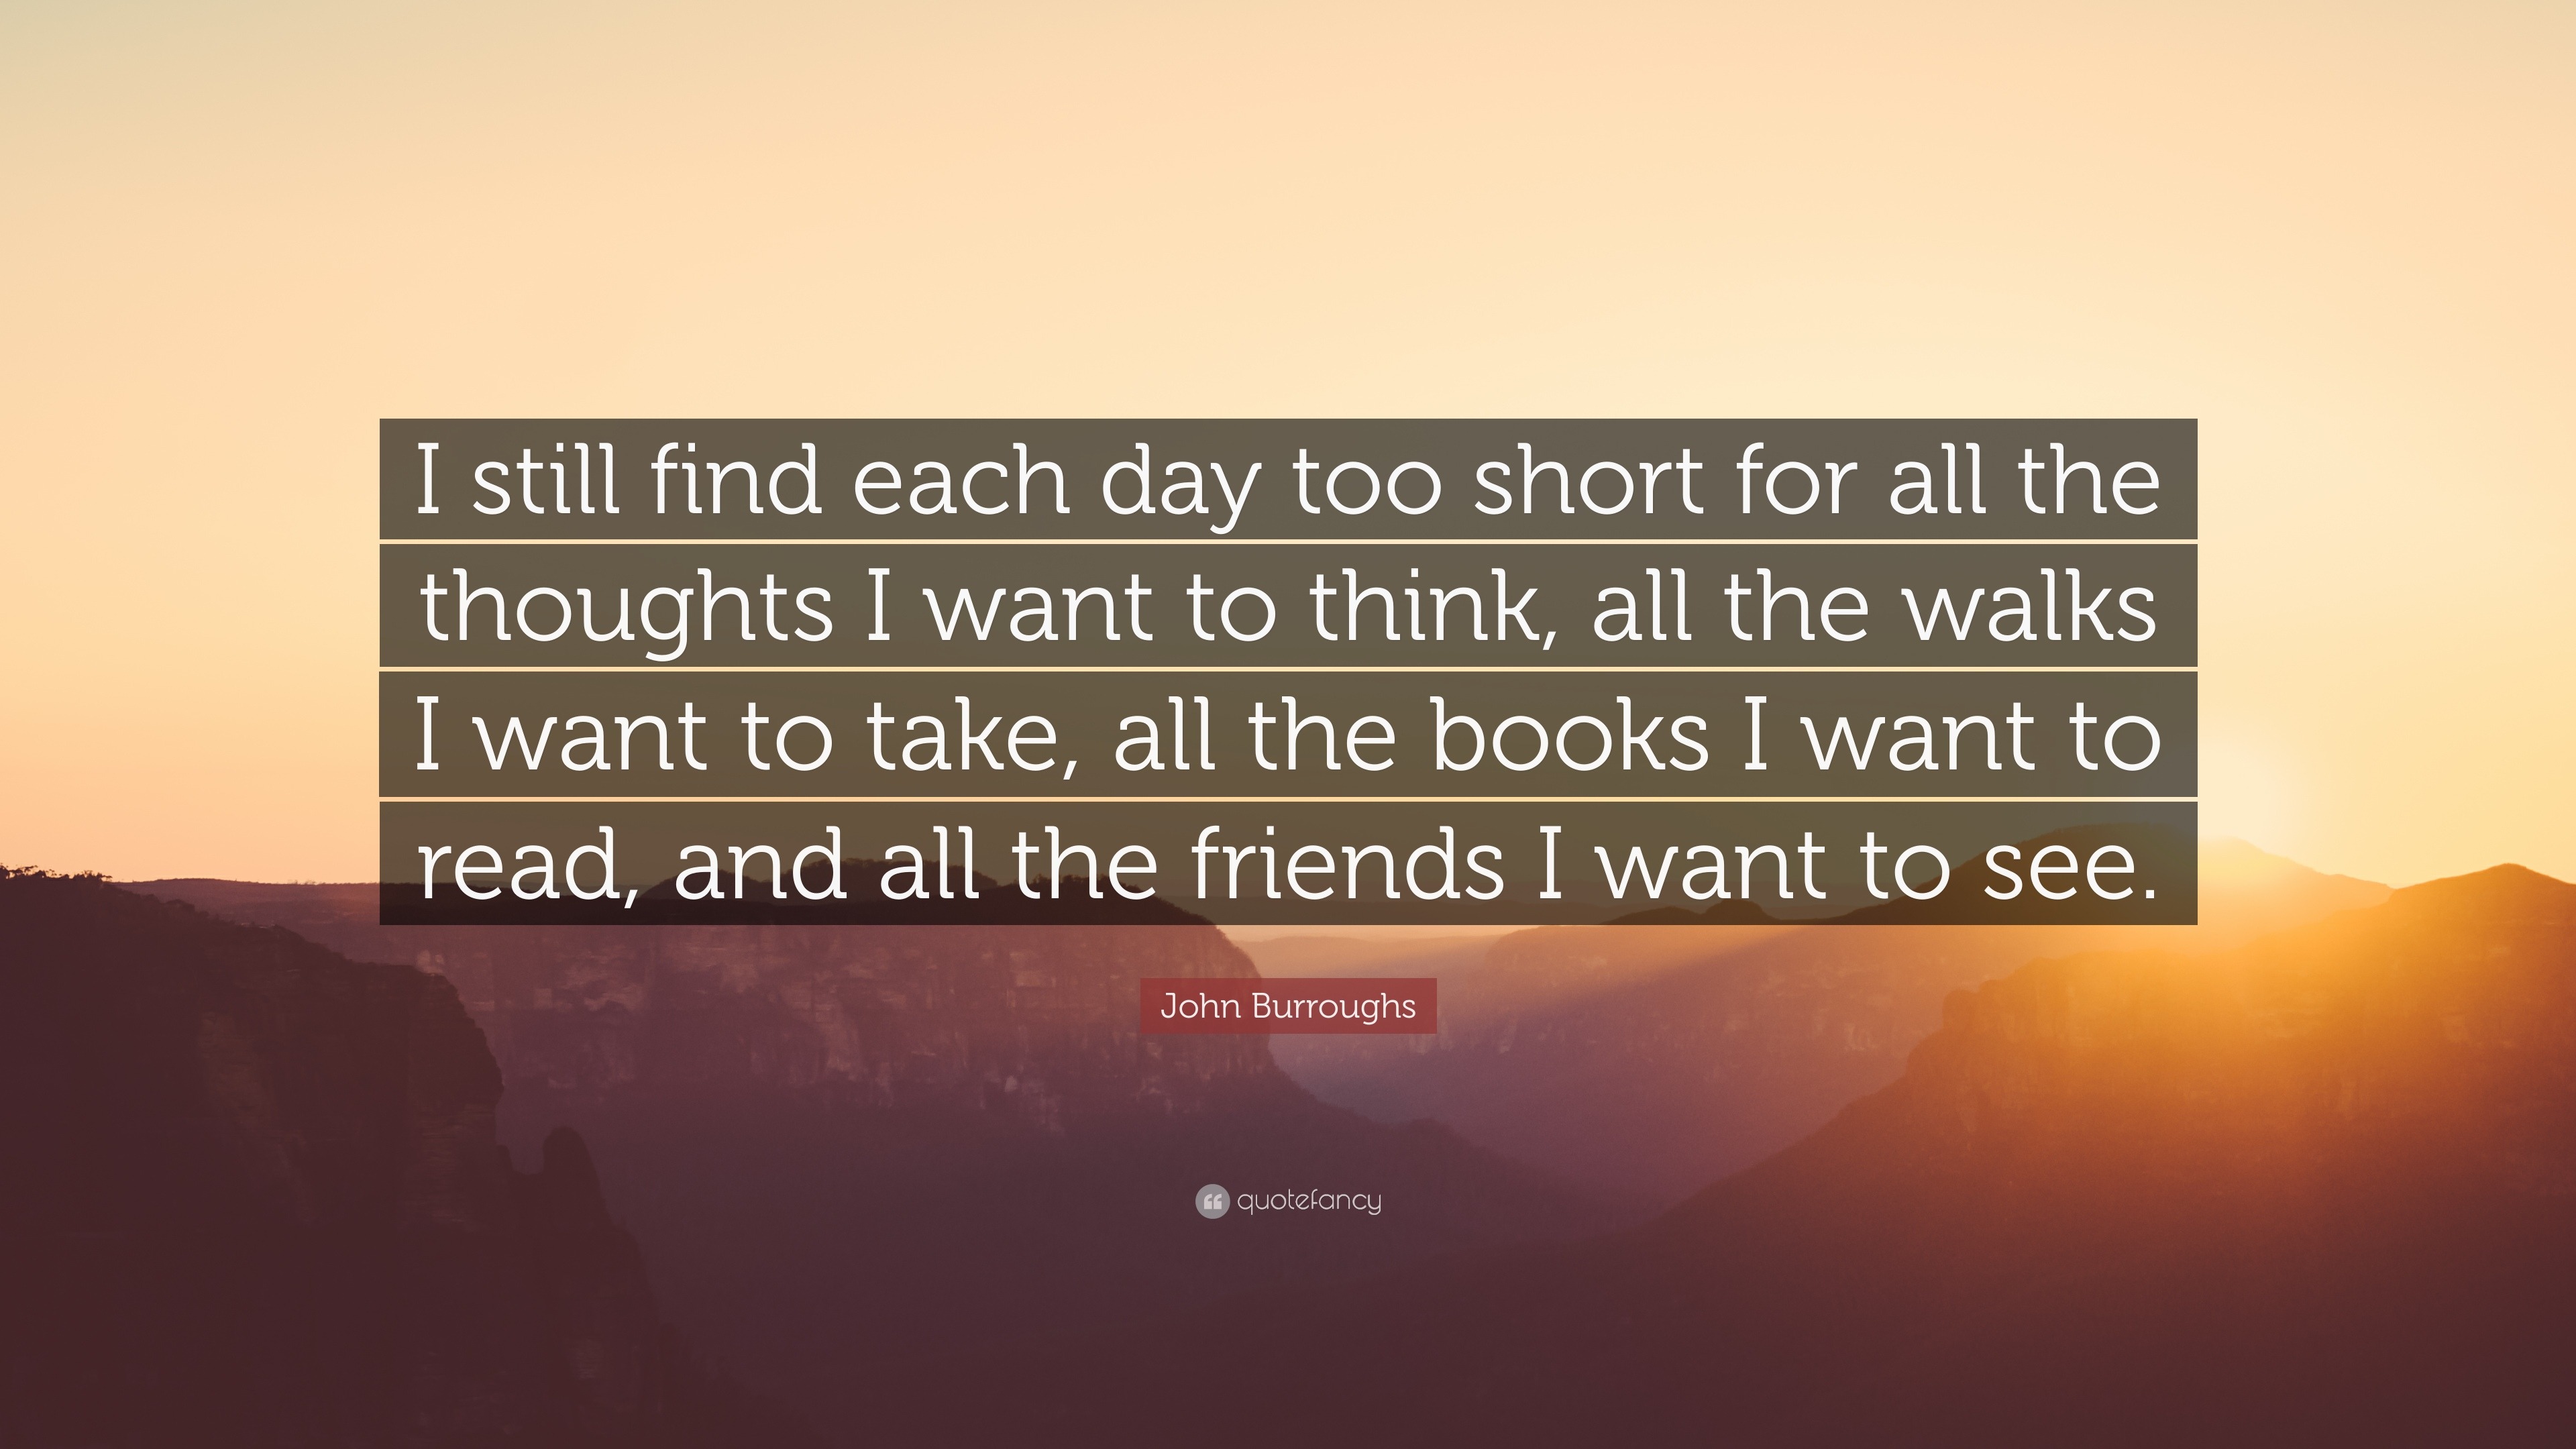 John Burroughs Quote: “I still find each day too short for all the ...